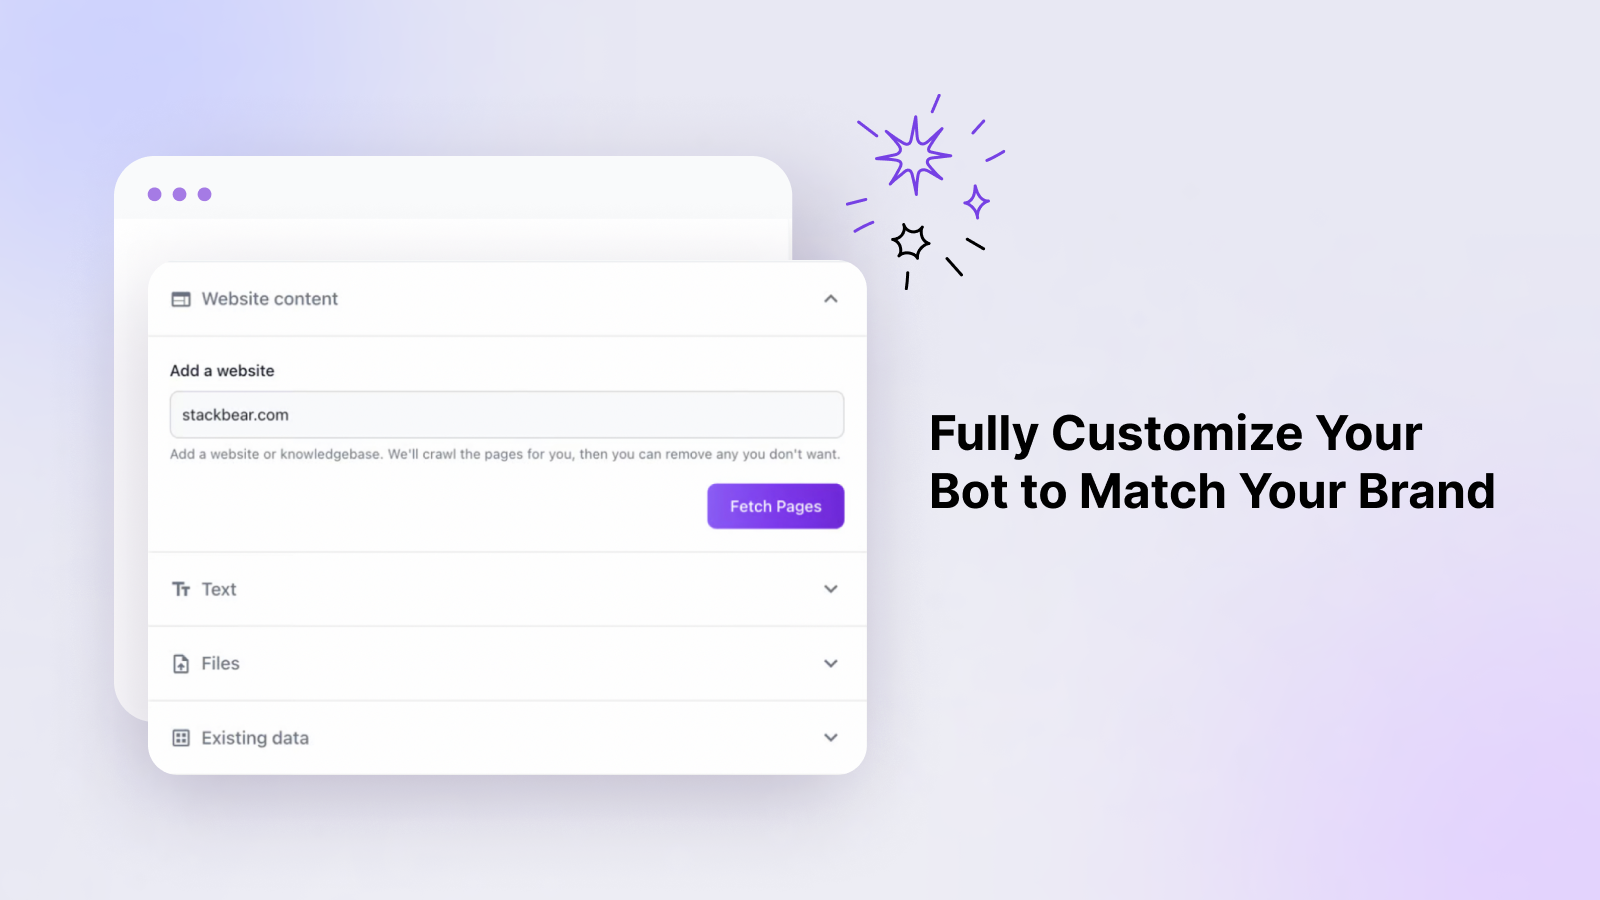 Fully Customize Your Bot to Match Your Brand